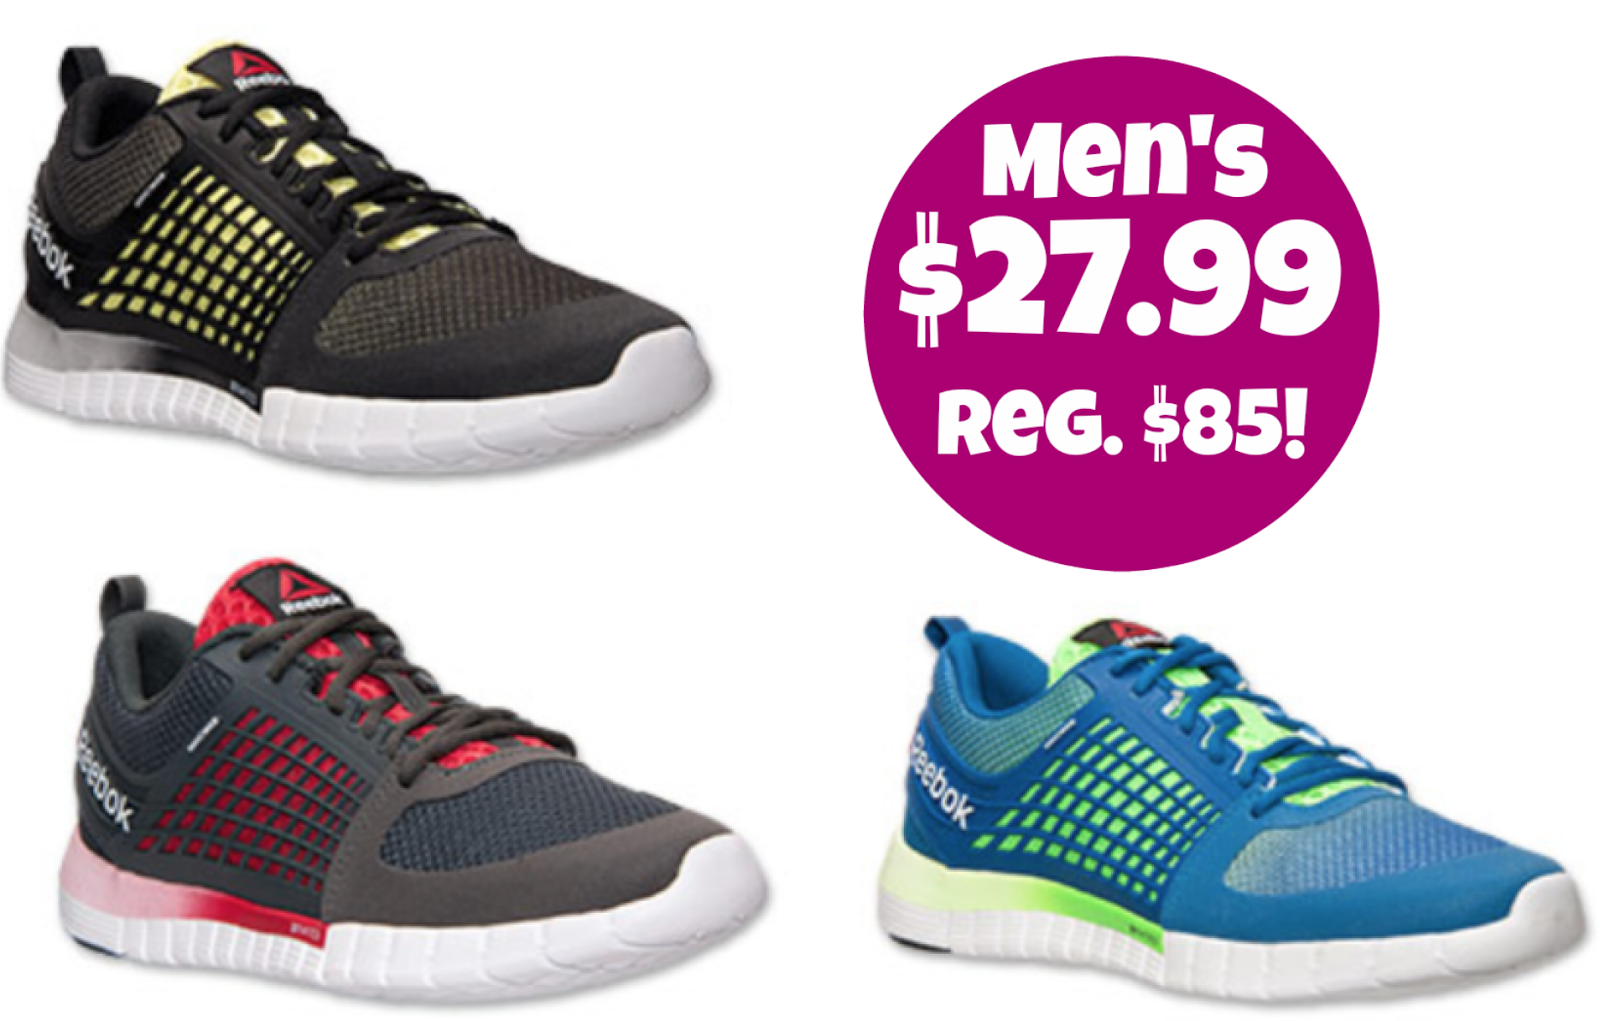 reebok shoes 2015 images